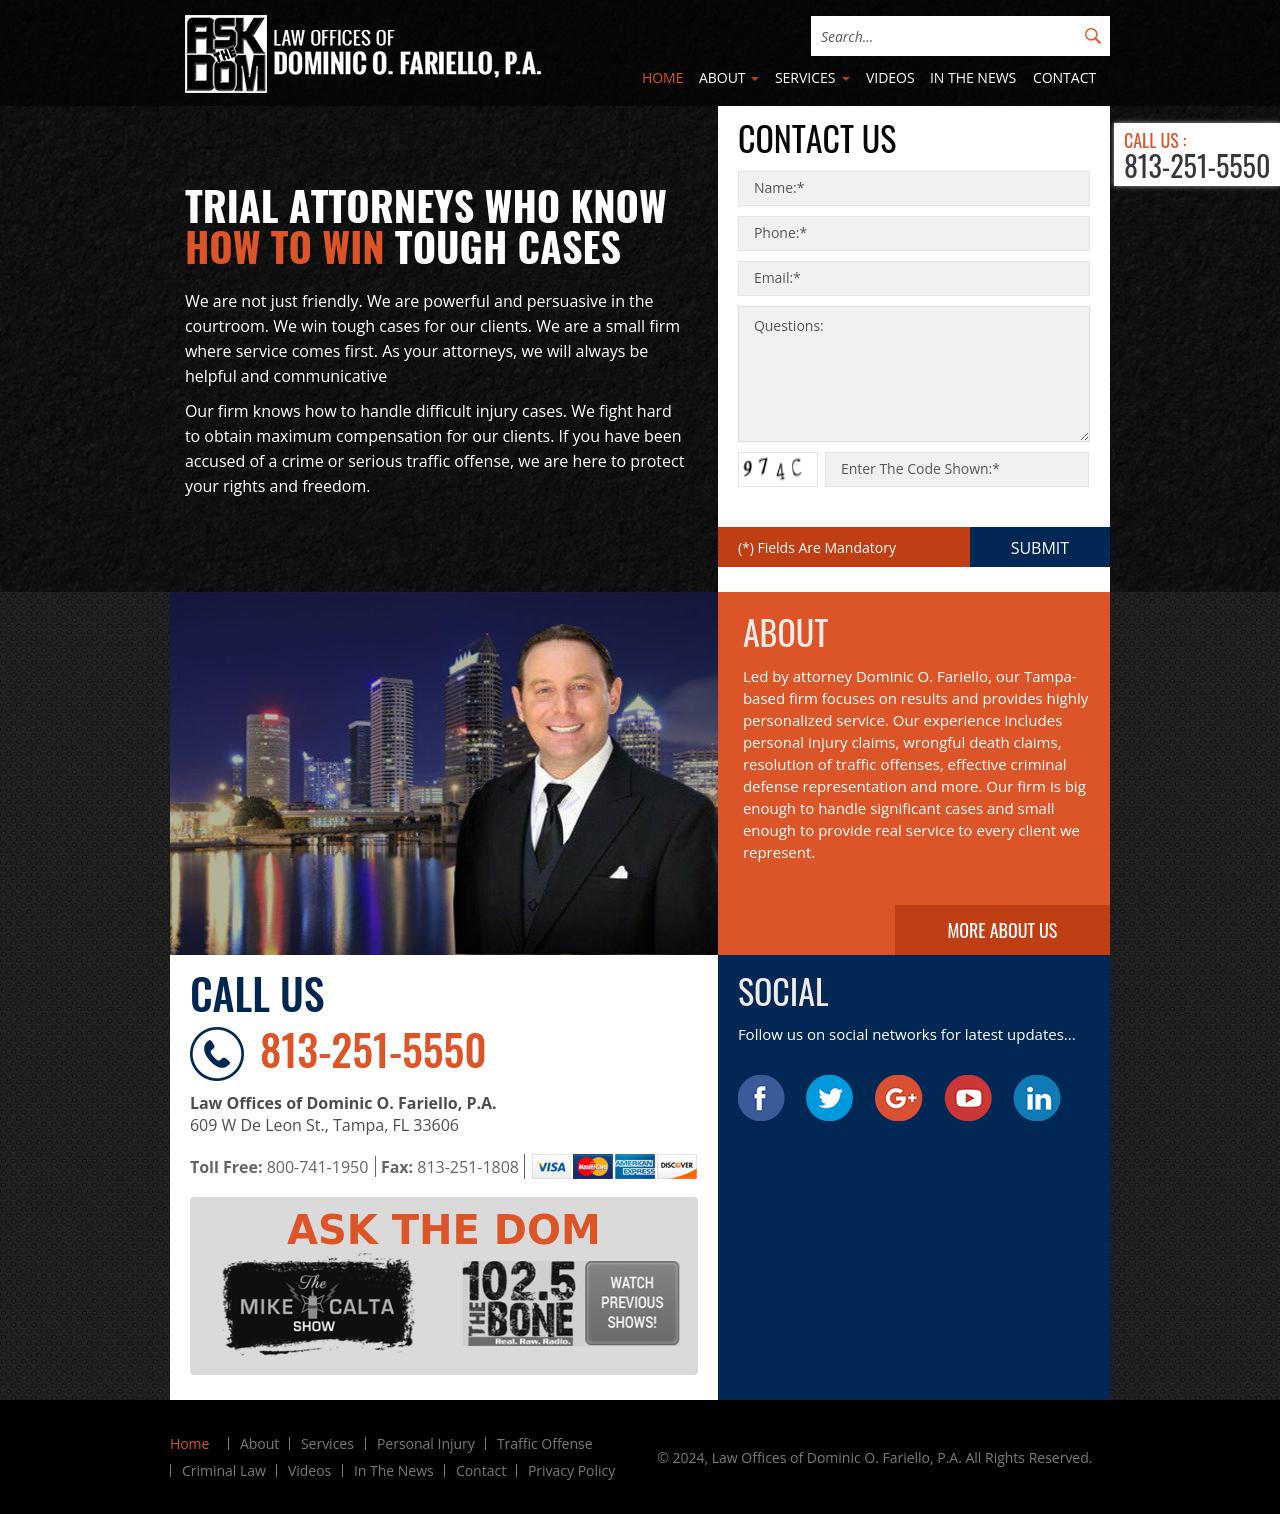 Law Offices of Dominic O. Fariello, P.A. - Tampa FL Lawyers